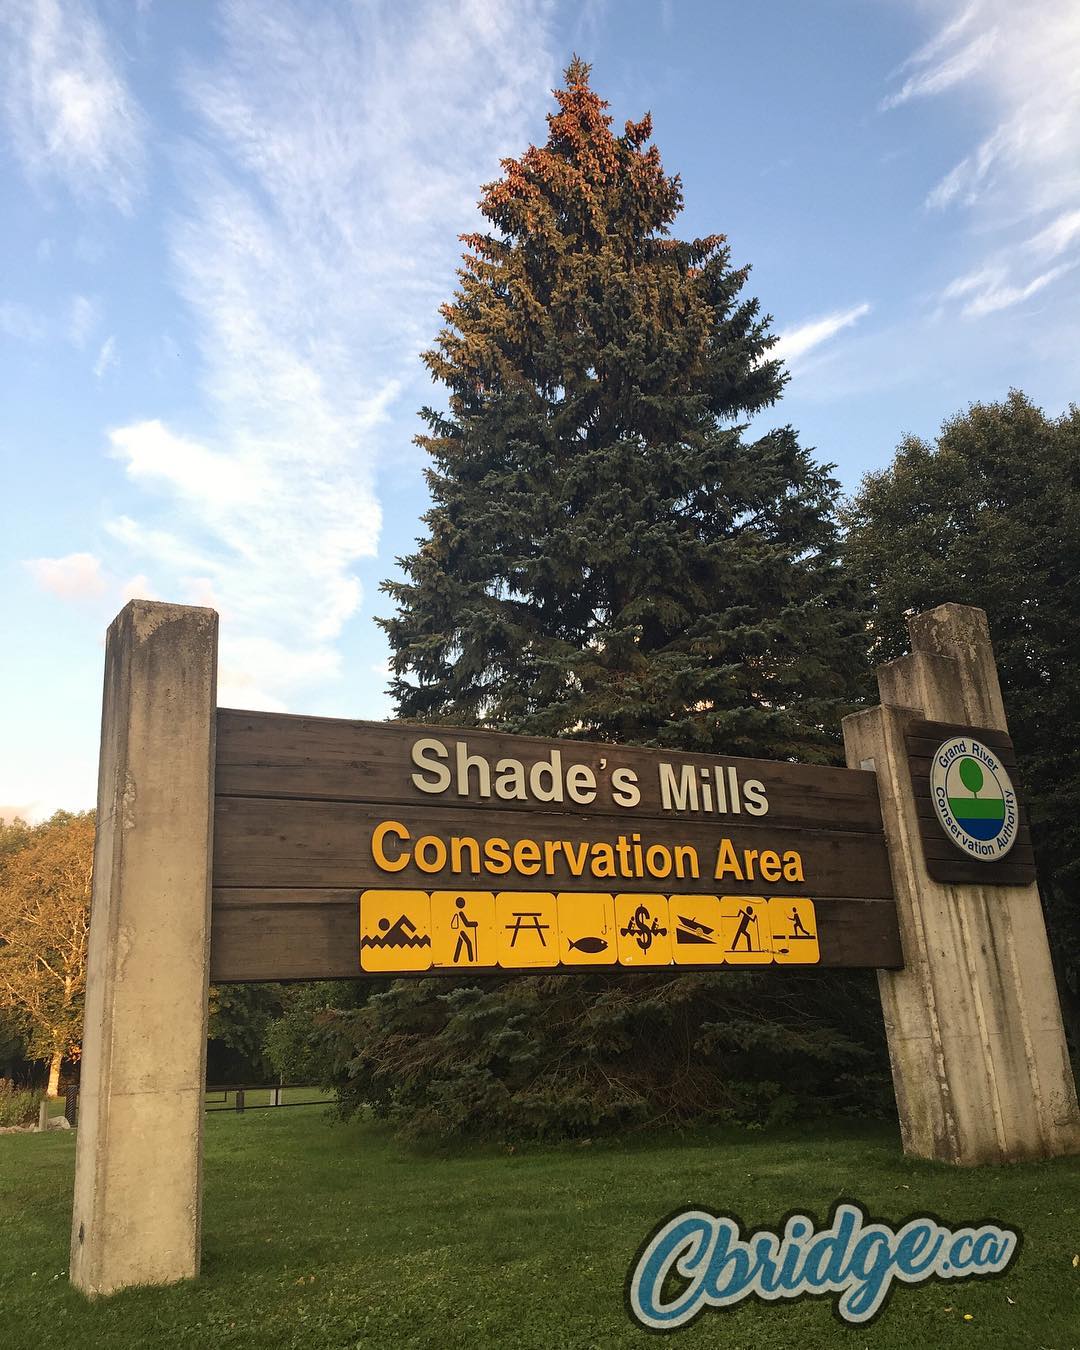 Getting shady at Shade’s Mills – open from dawn to dusk every day #cbridge #mycbridge #grca